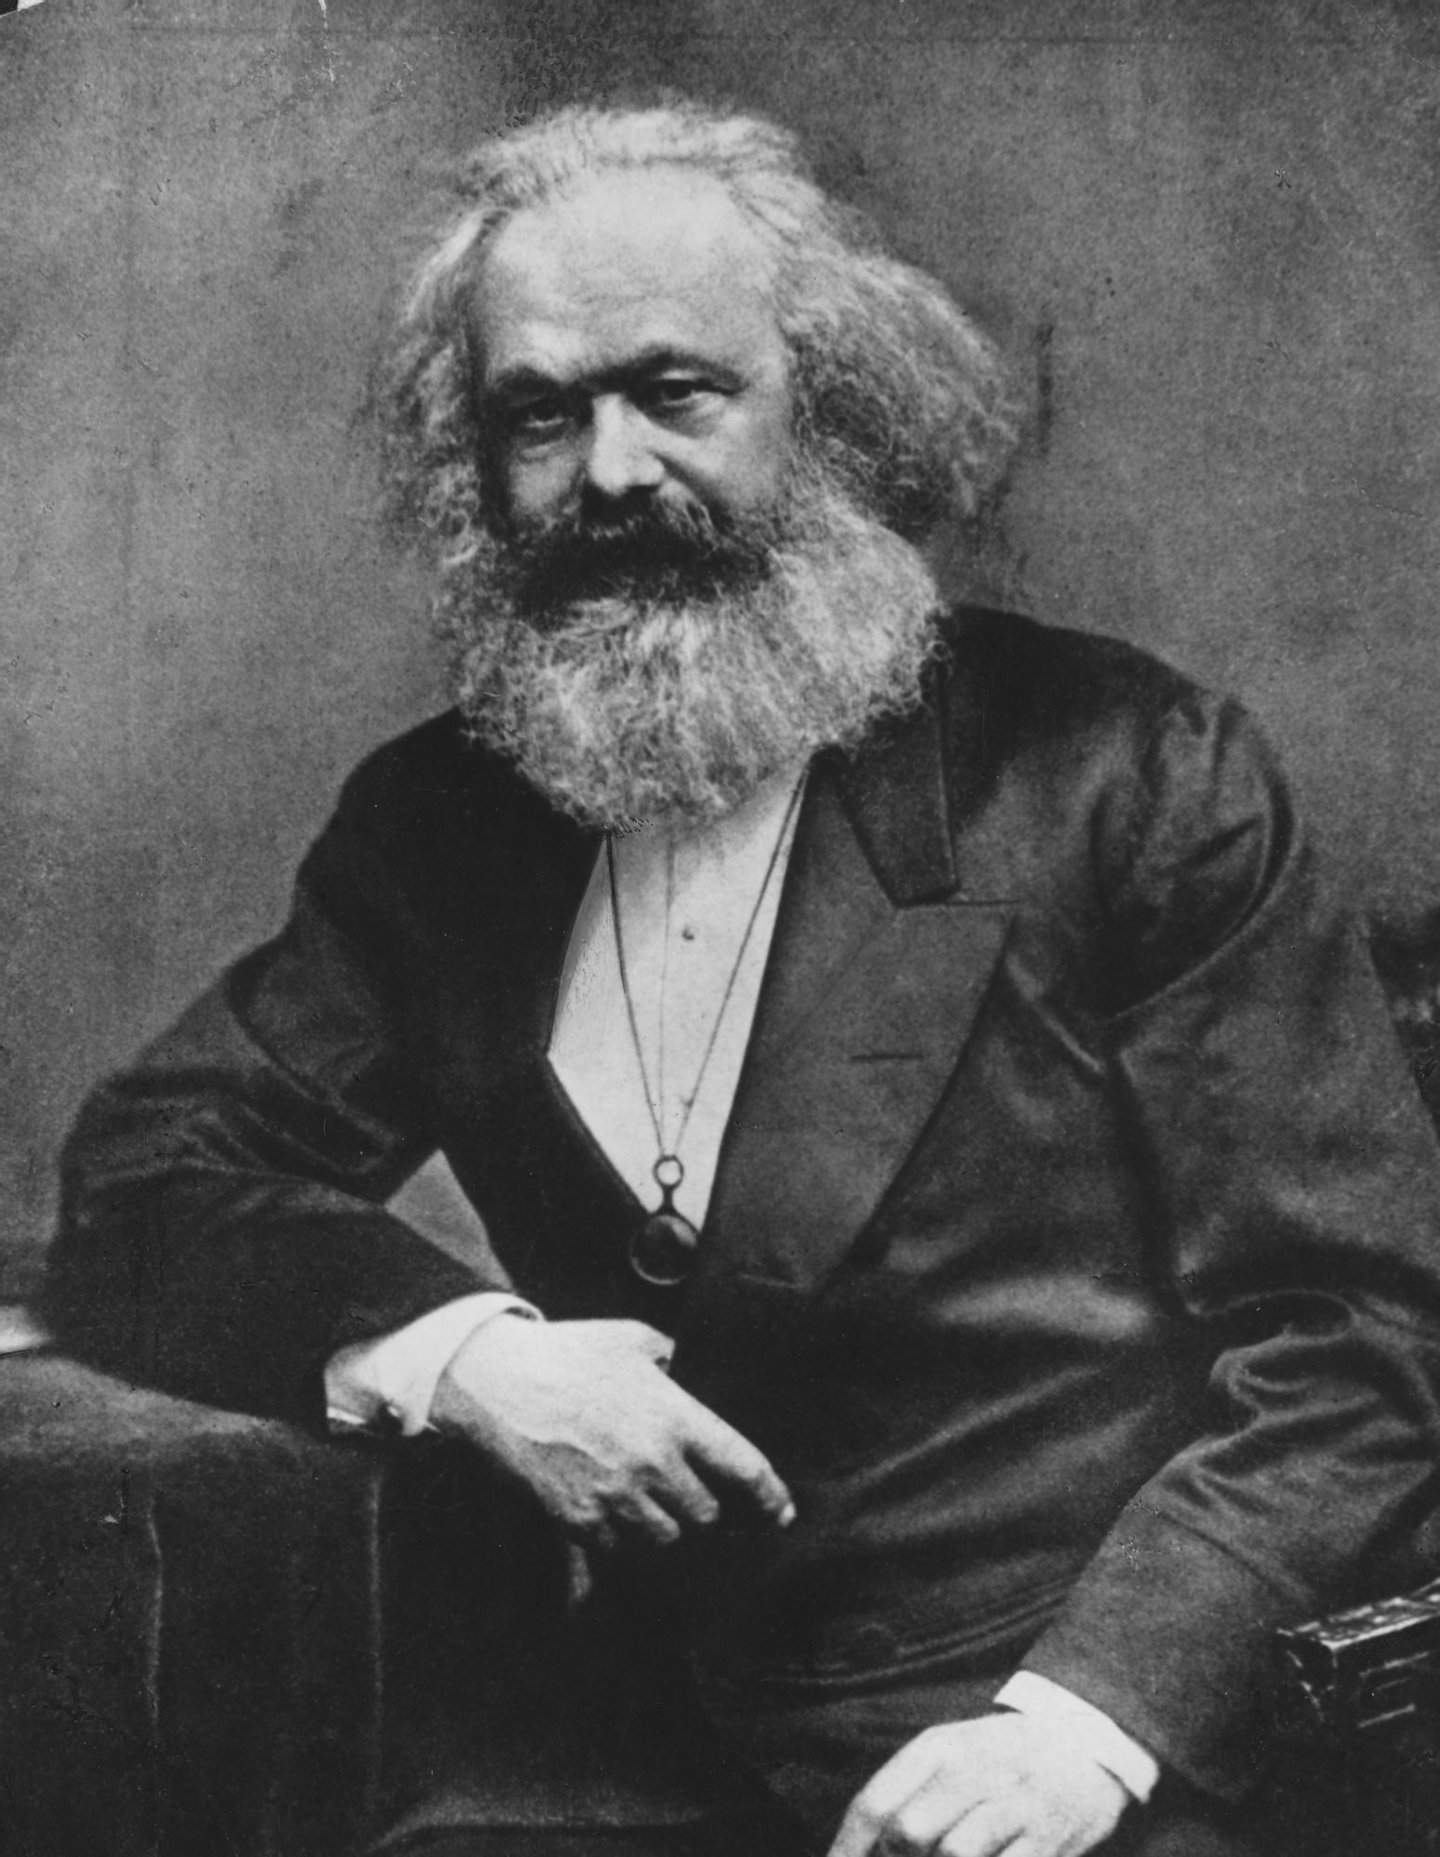 German social, political and economic theorist Karl Marx (1818 - 1883). (Photo by Henry Guttmann/Getty Images)